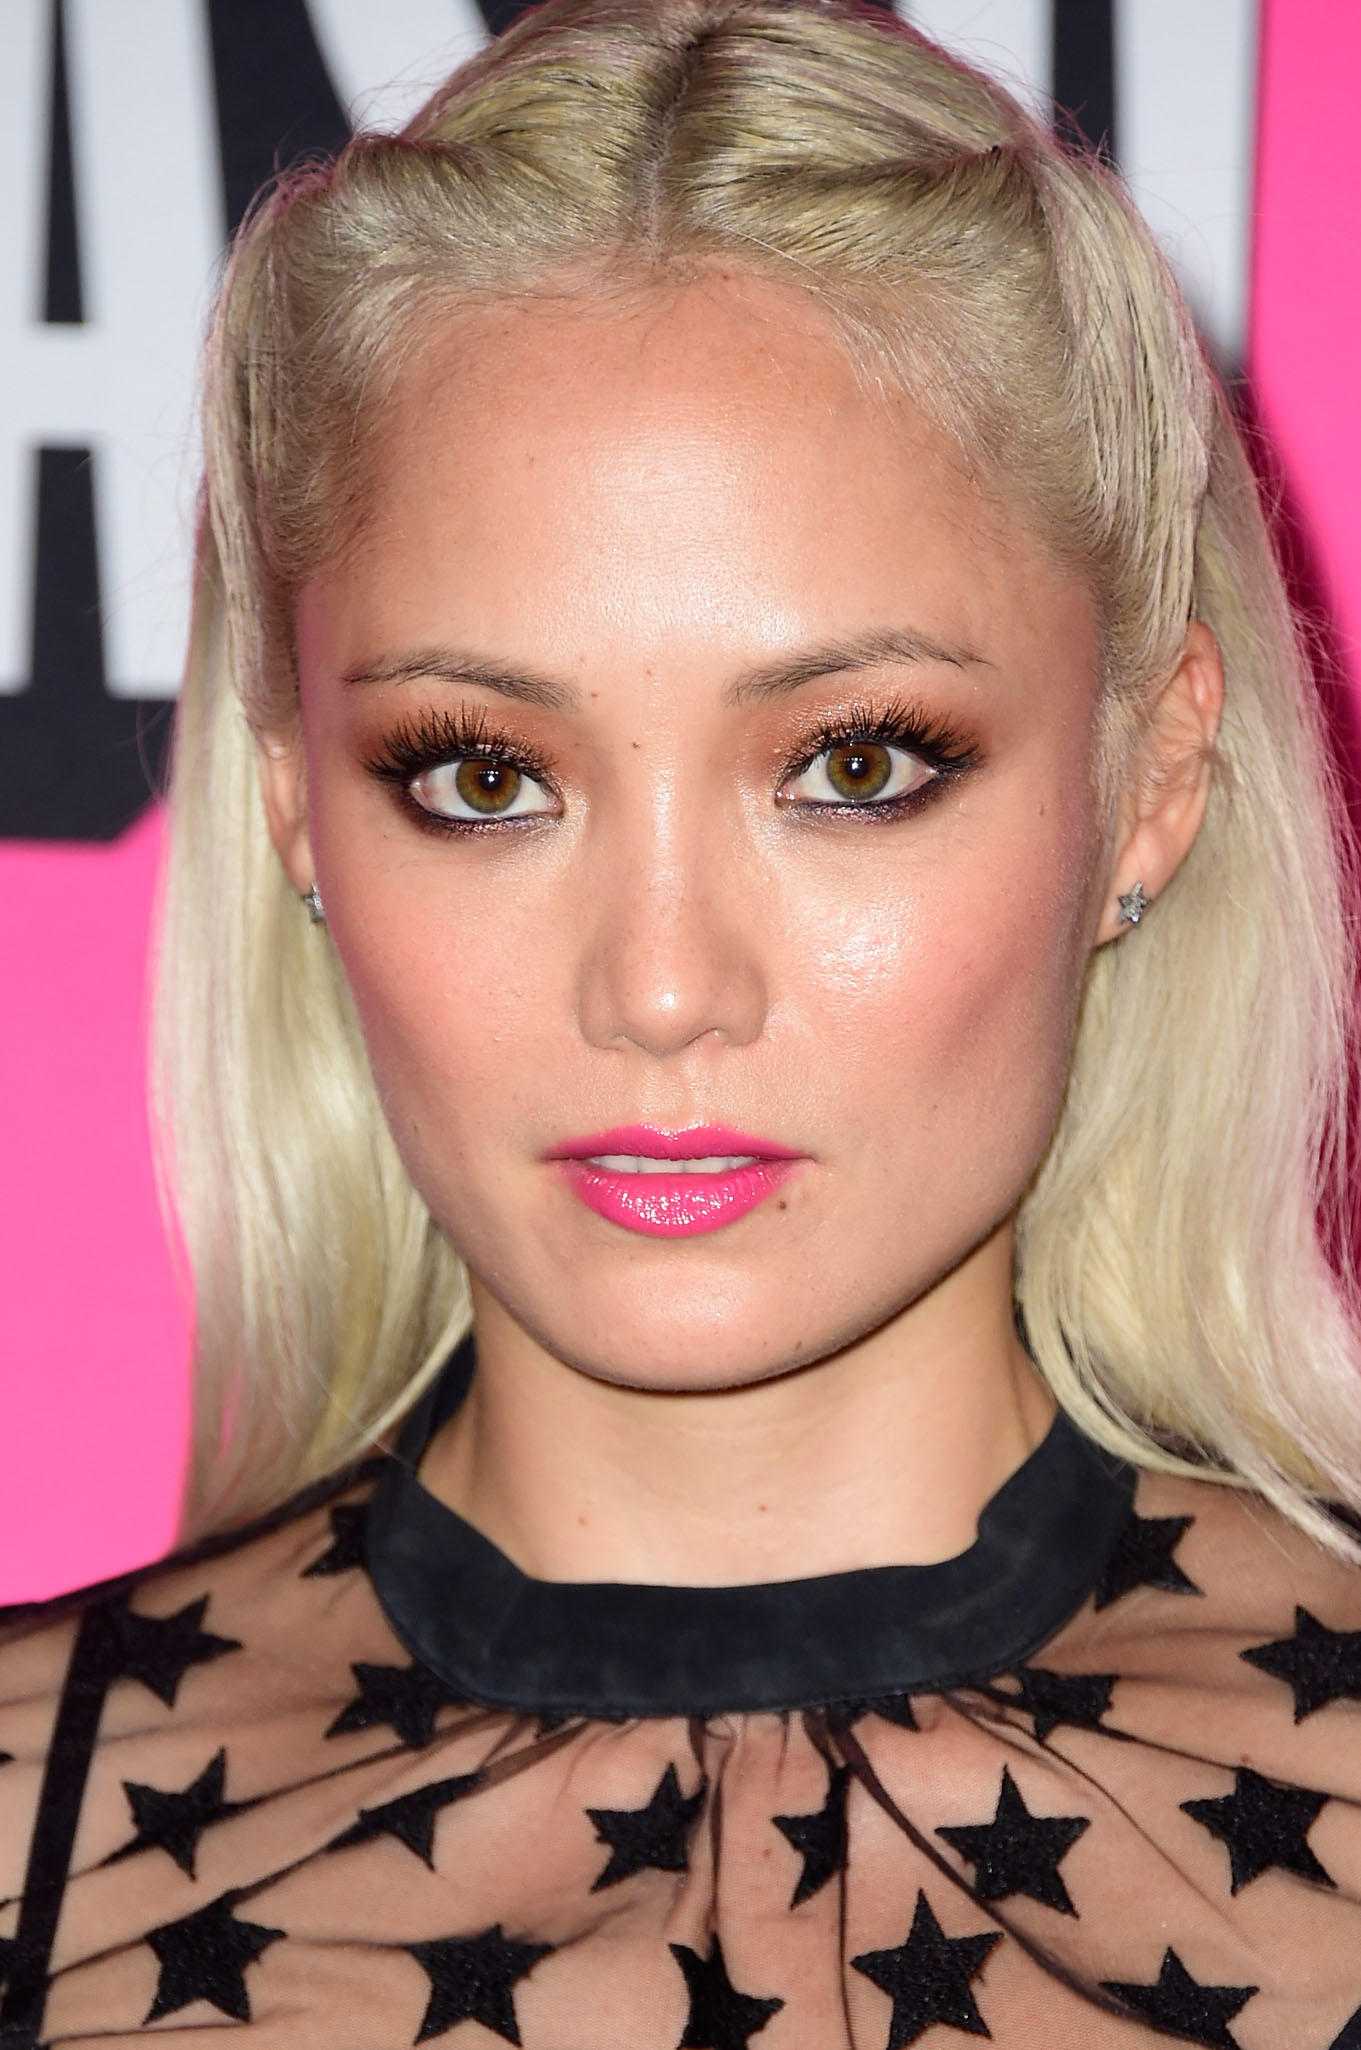 70+ Hot Pictures Of Pom Klementieff Who Plays Mantis In Marvel Cinematic Universe 144